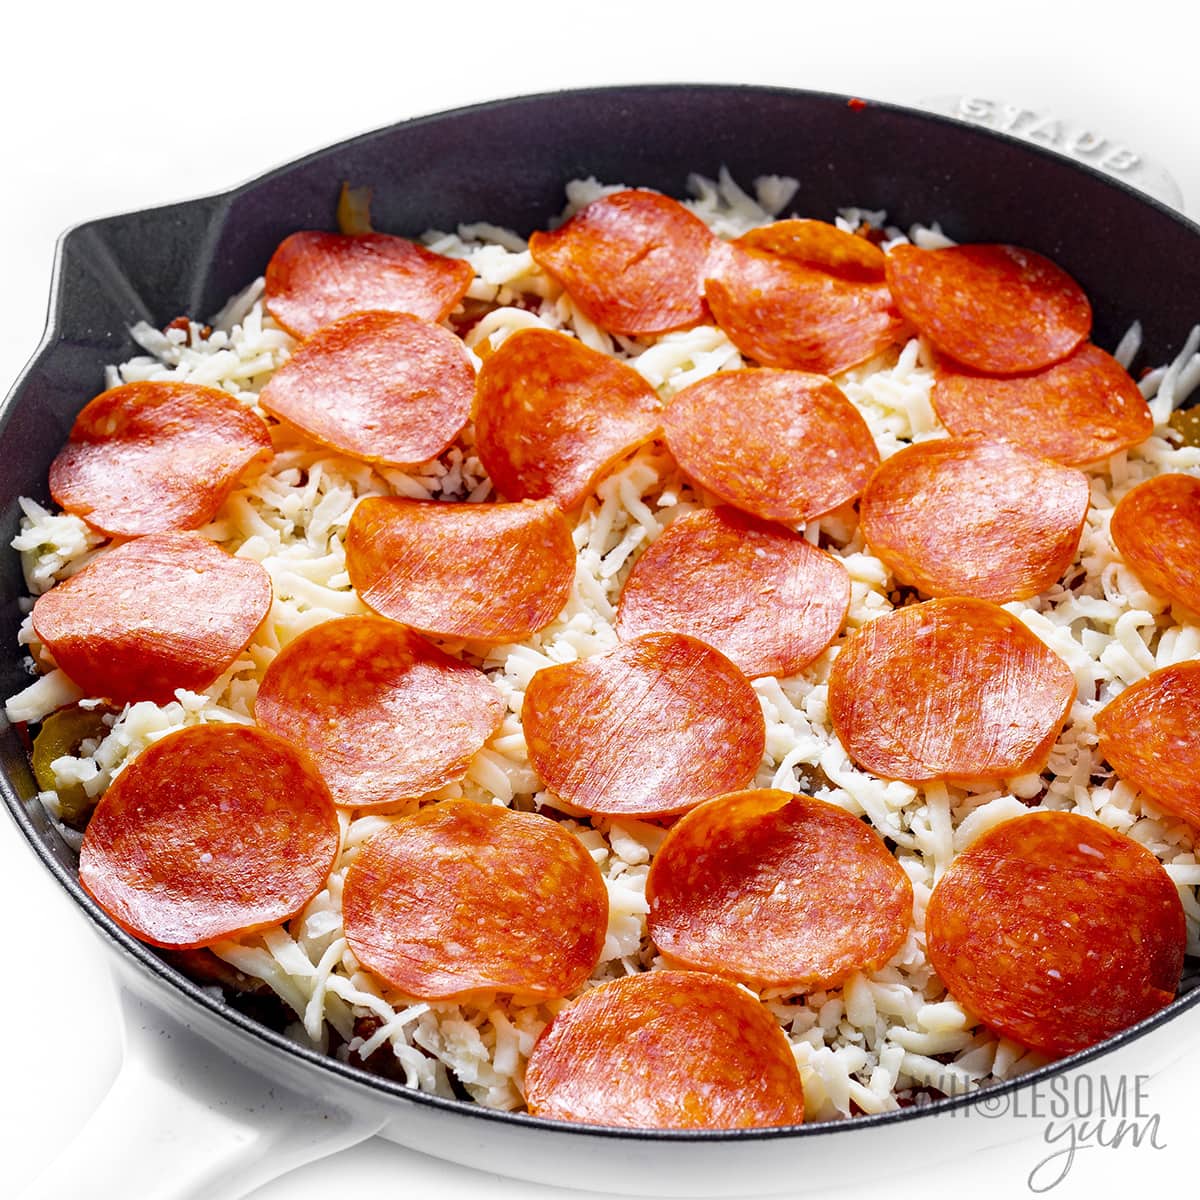 Pizza toppings added to crustless skillet pizza.